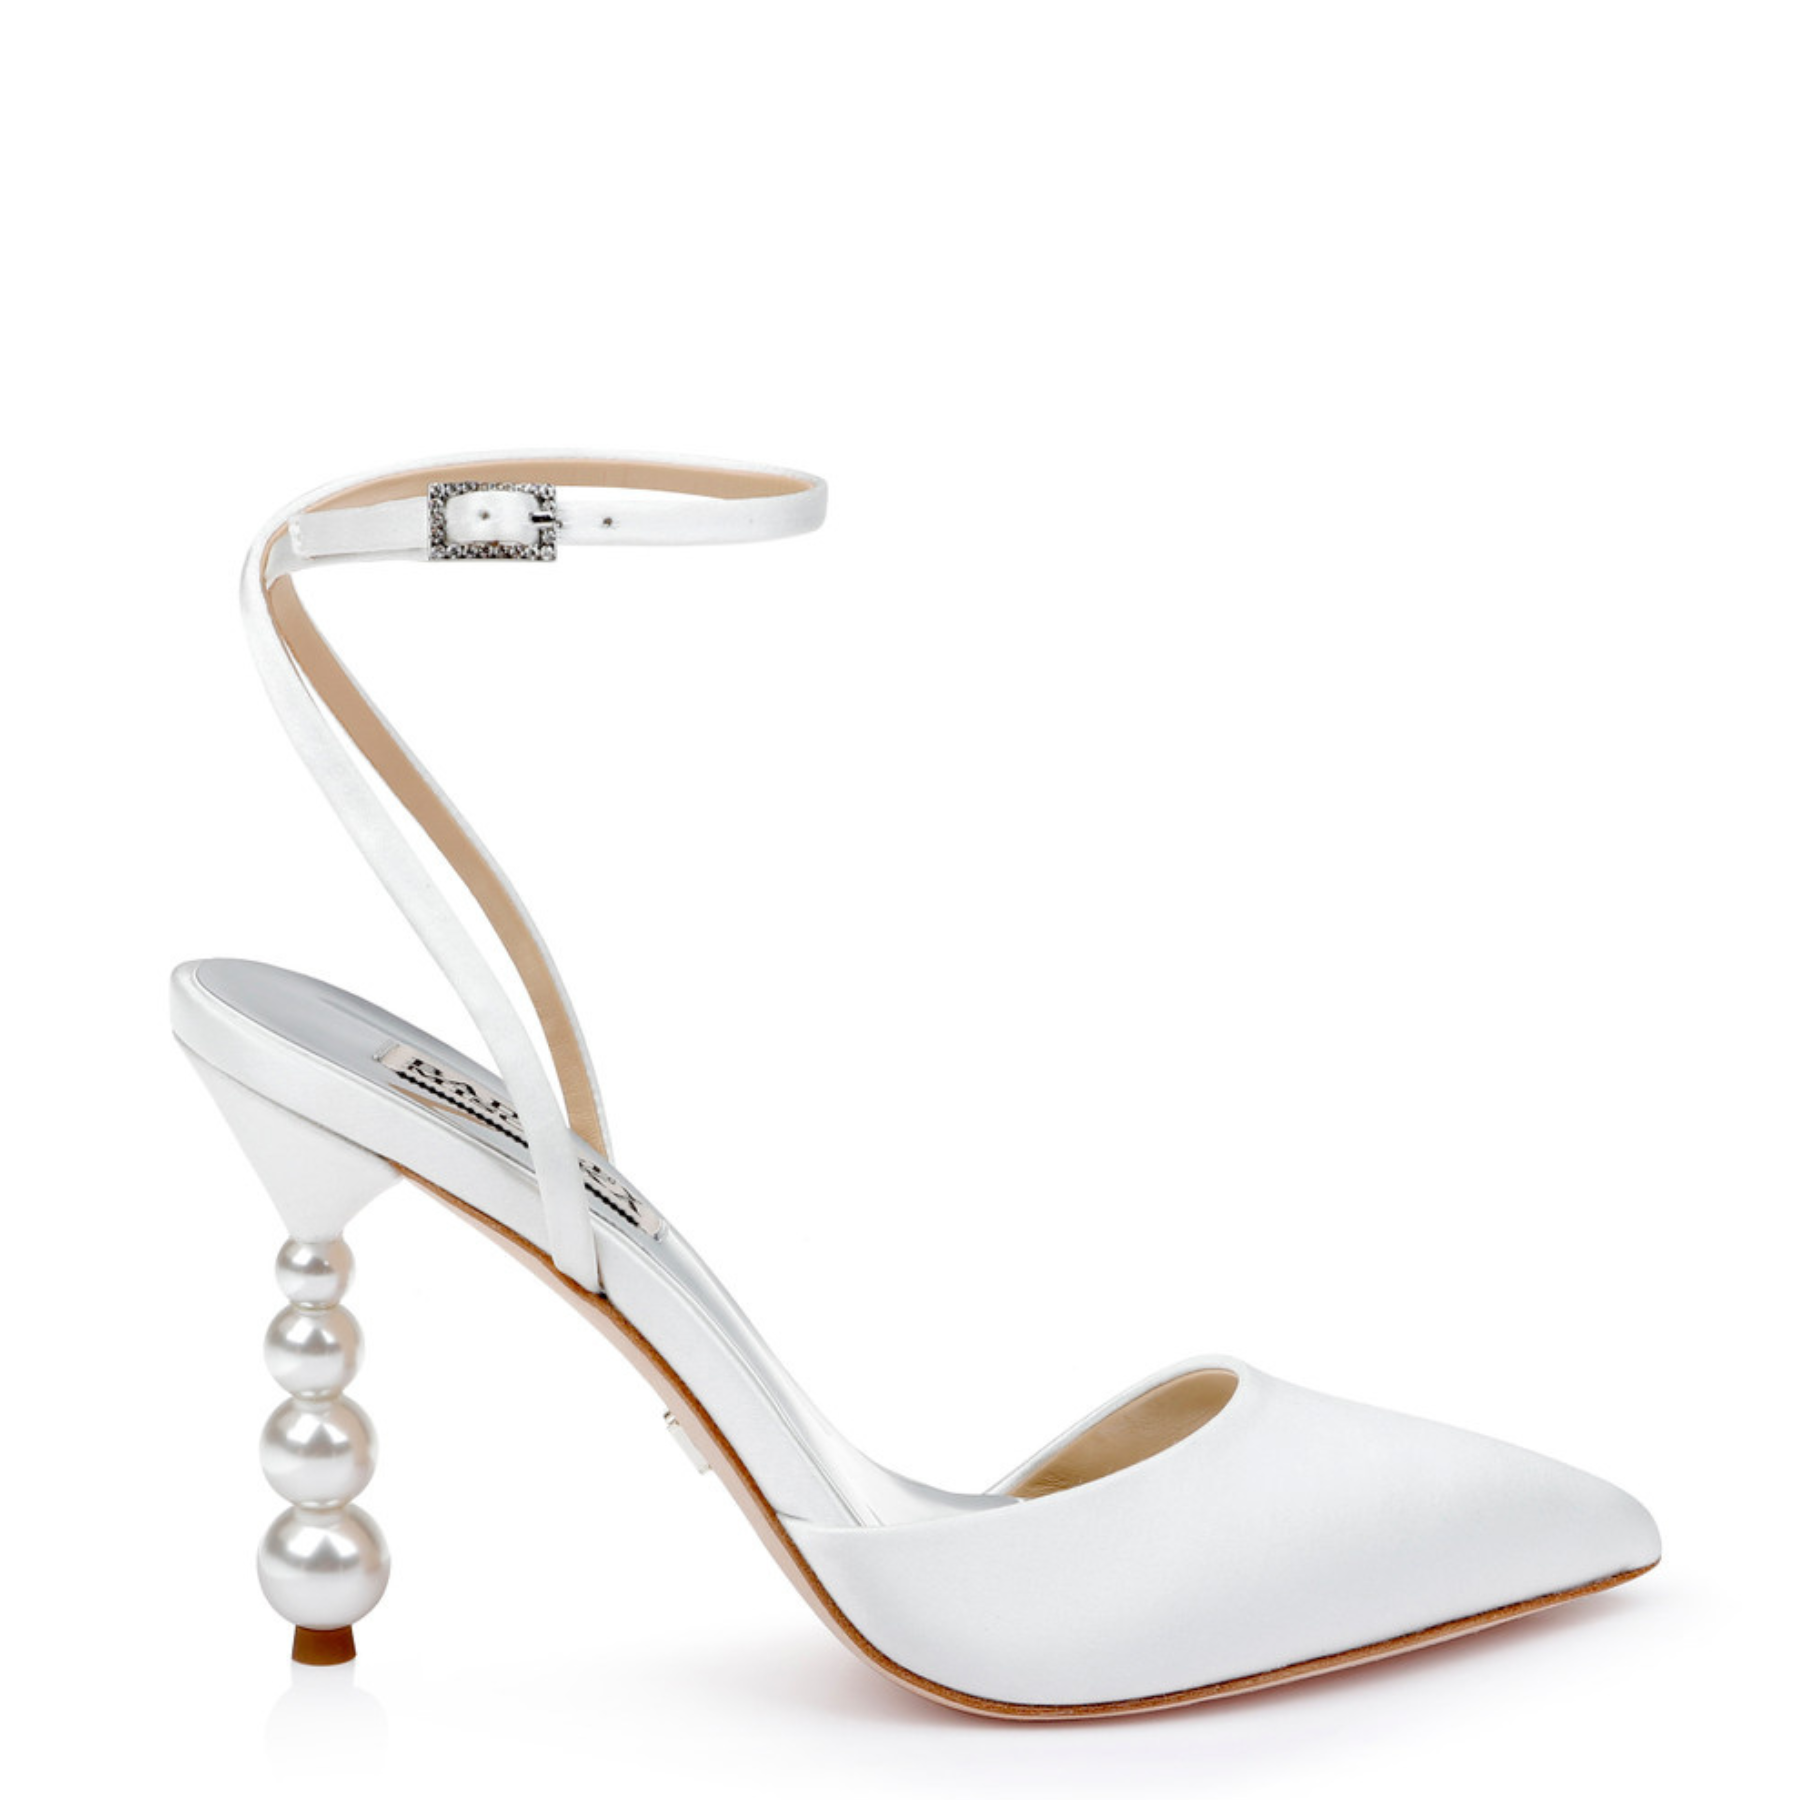 Indie - Pearl Heel Stiletto with Pointed Toe - Soft White